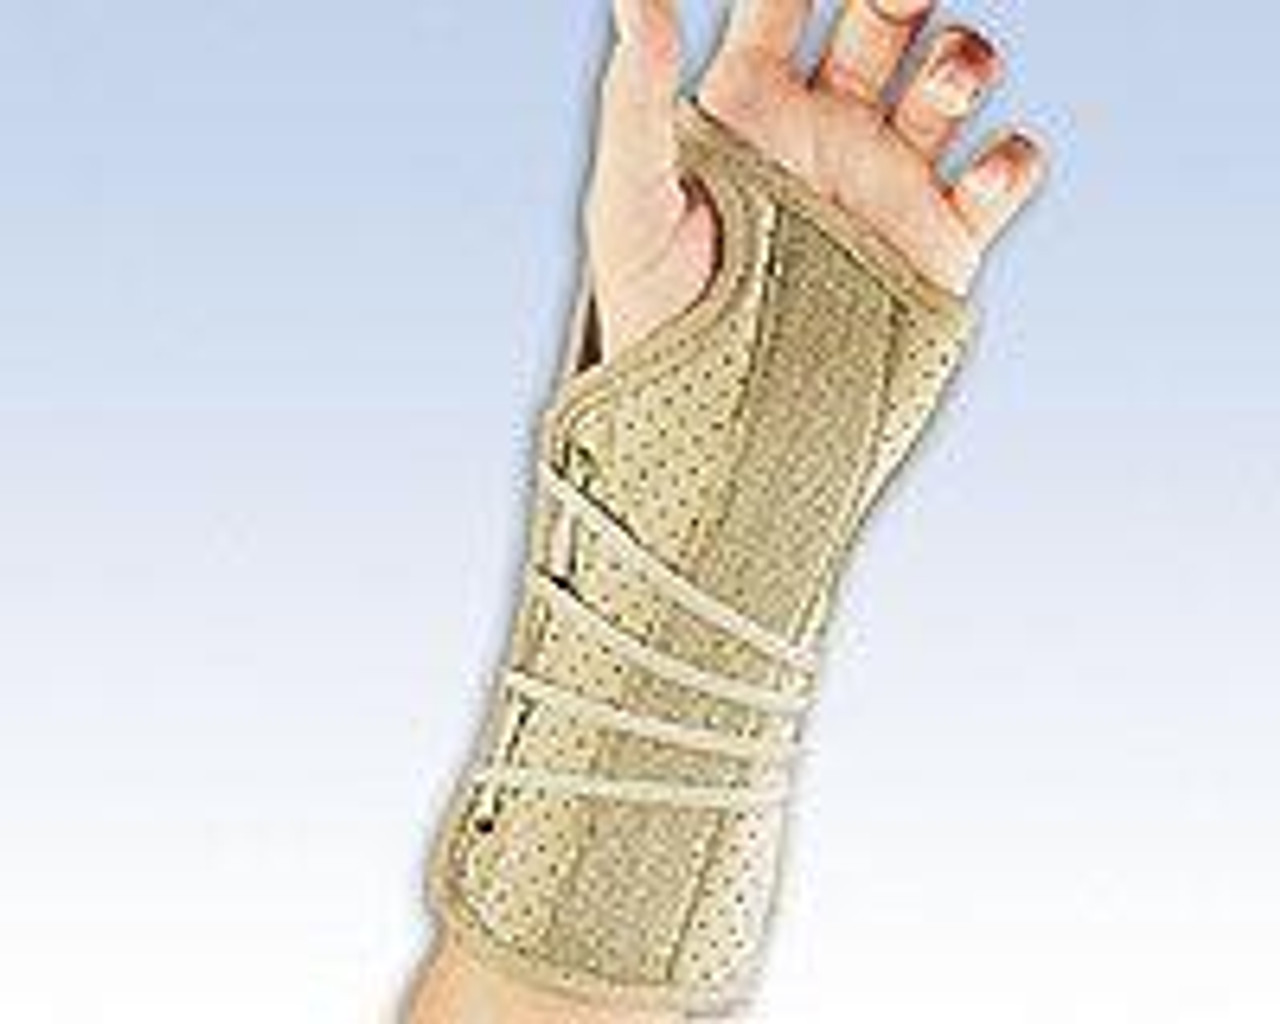 BSN-22150720 SILVER LABEL SOFT FIT SUEDE WRIST SUPPORT XL (FITS OVER 7 1/2), LEFT, BEIGE (BSN-22150720)